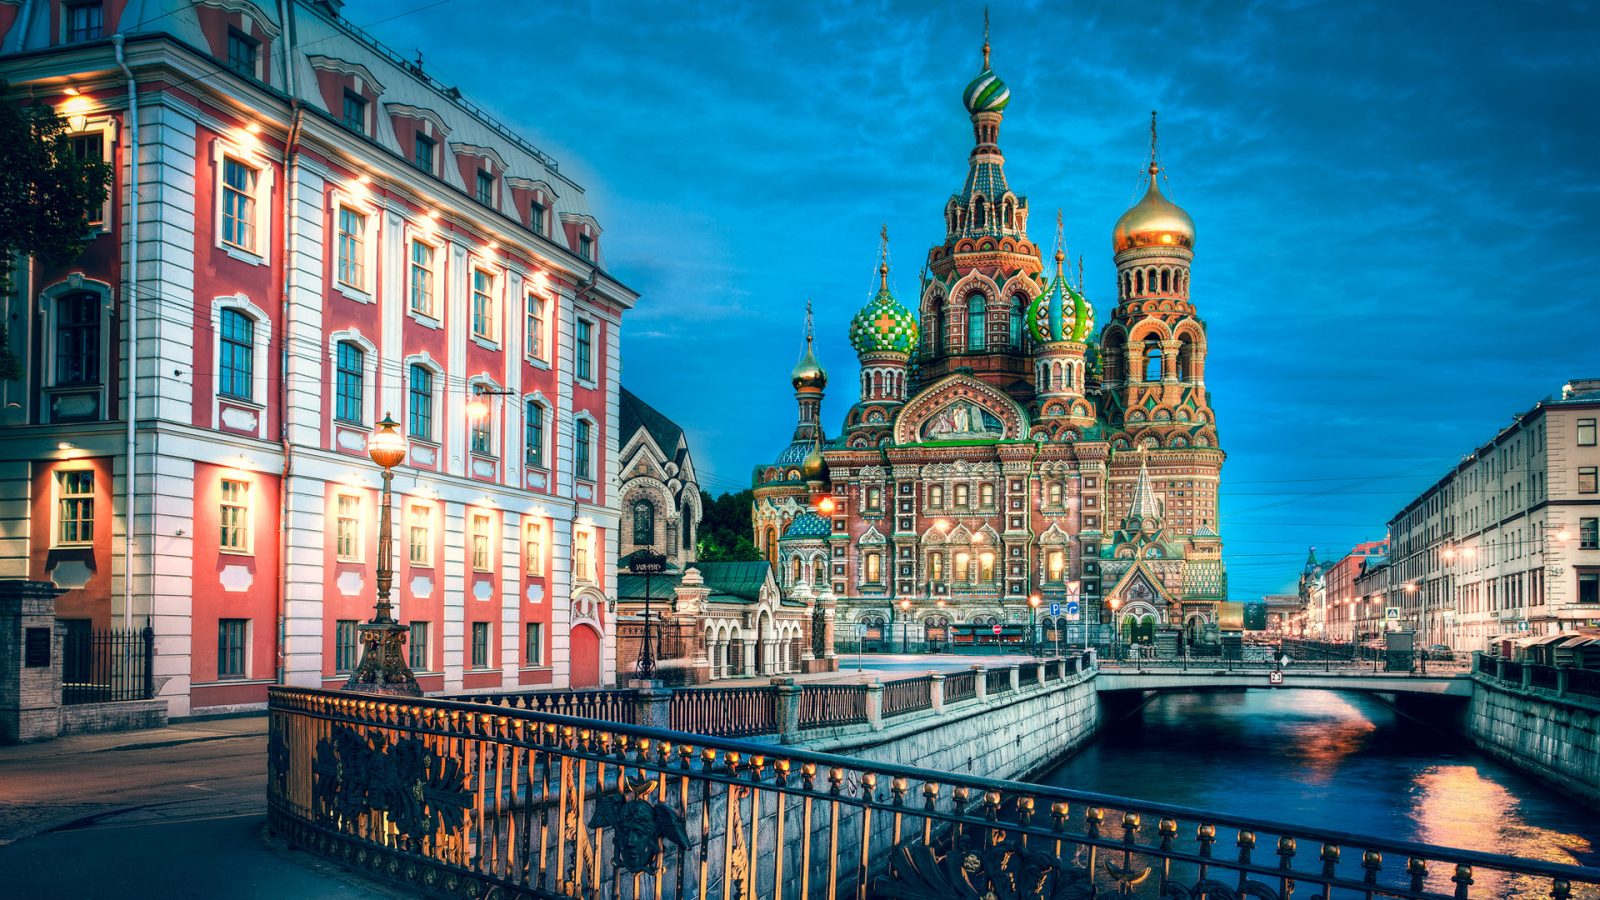 church-of-our-savior-on-the-spilled-blood-in-st-petersburg-hd-wallpaper-578074